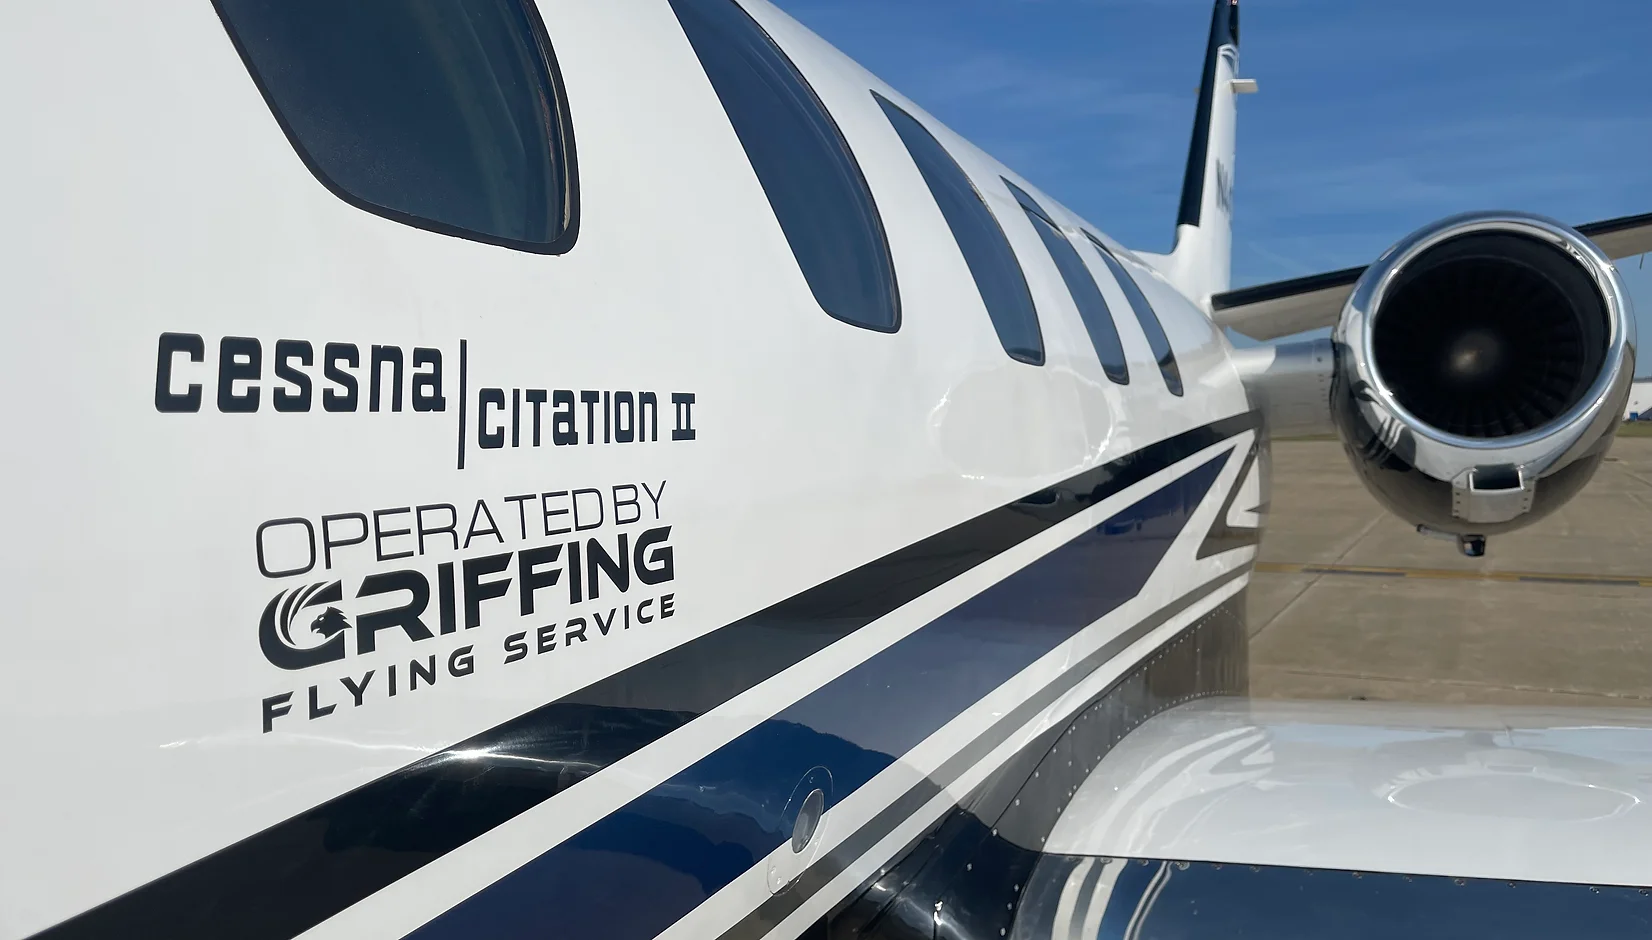 Citation II Side view detail | Griffing Private Air Charter Plane Flying Service in Port Clinton Ohio